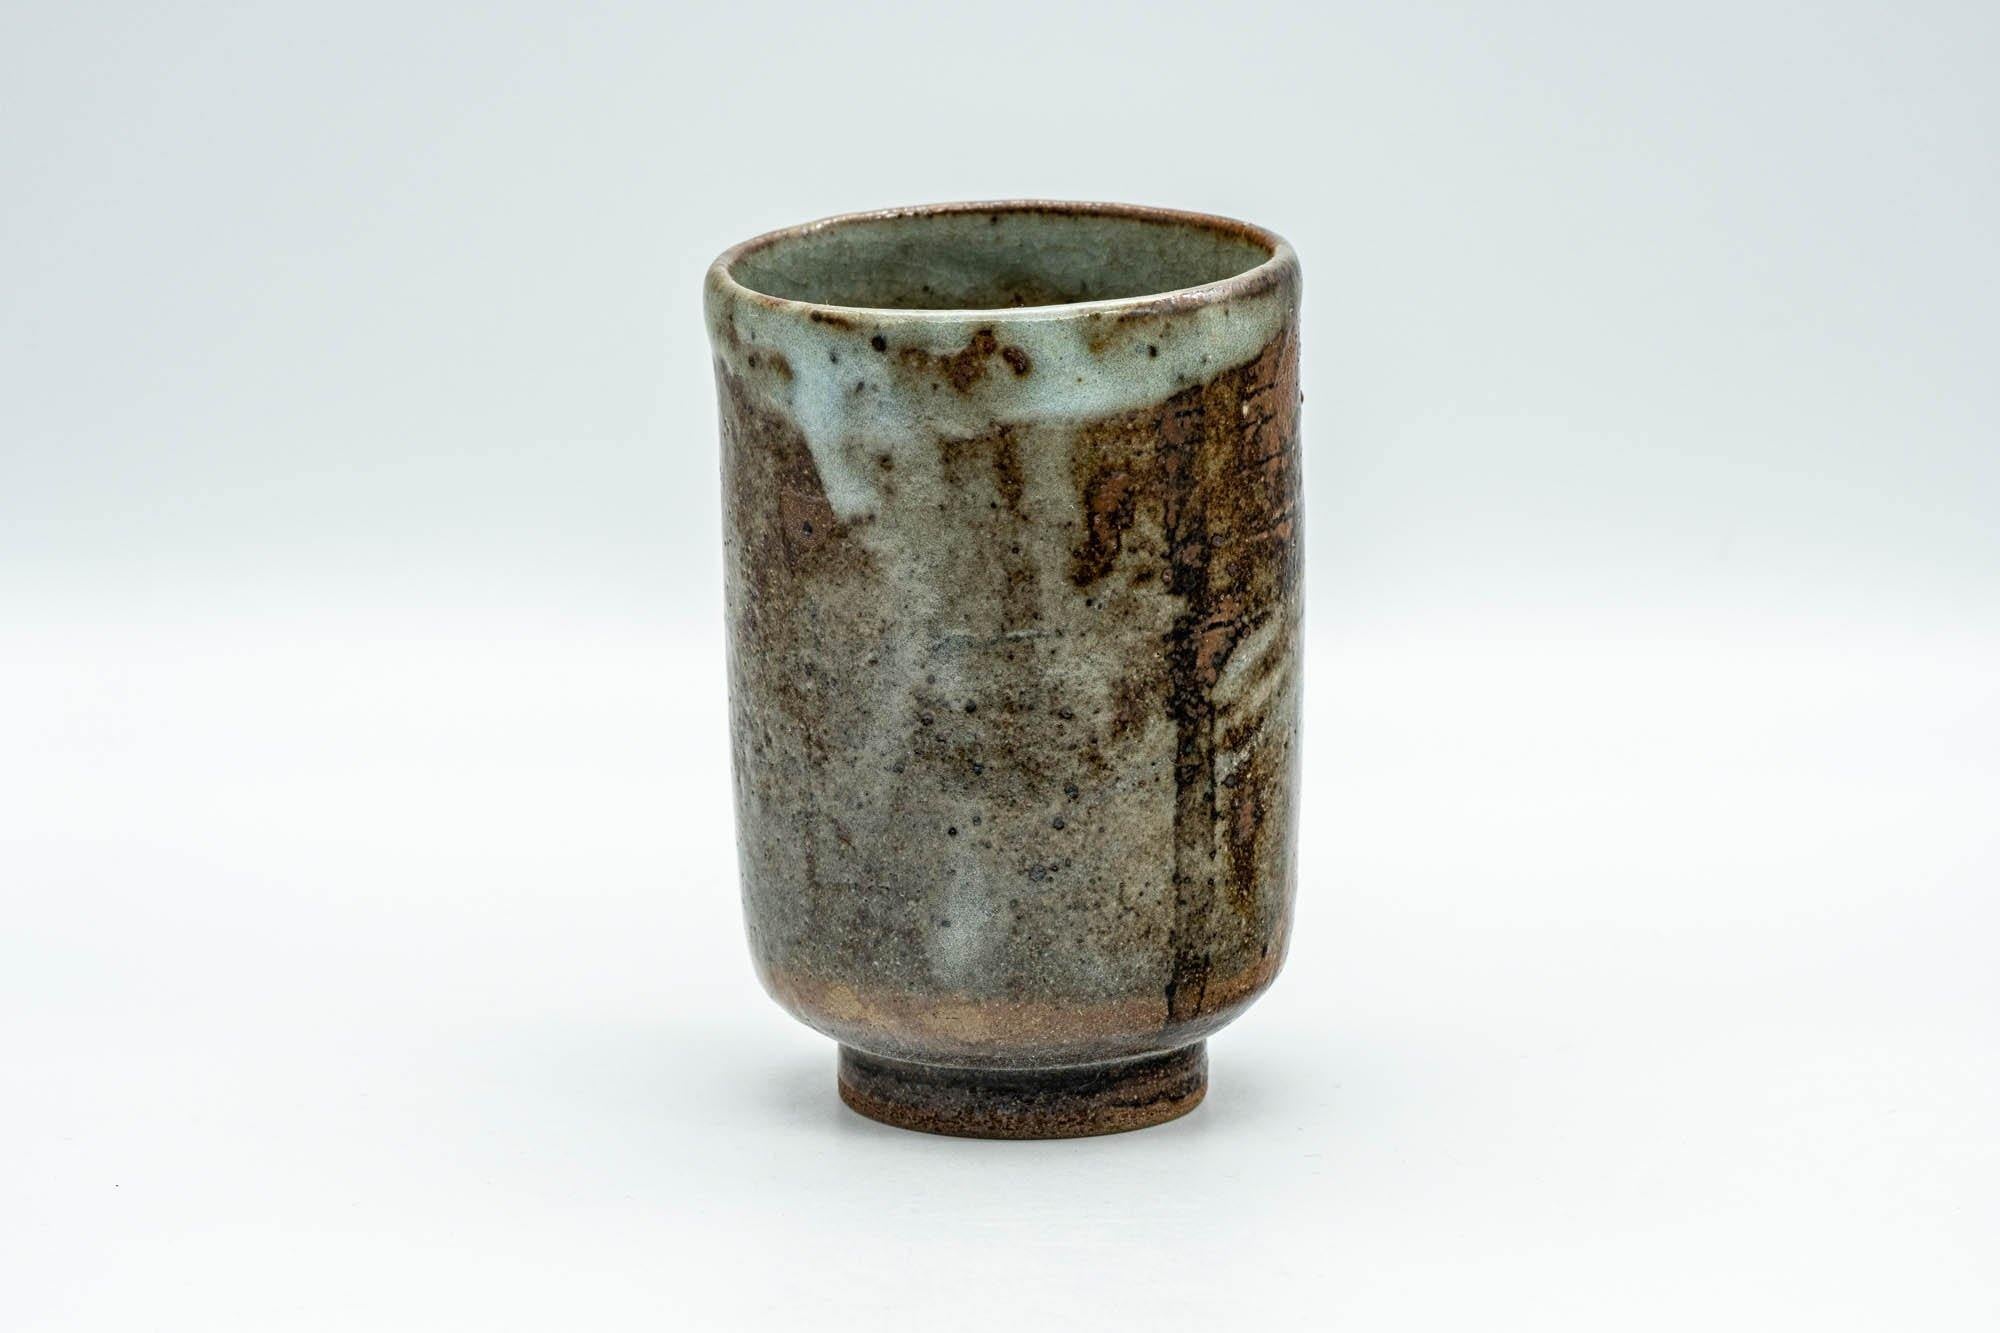 Japanese Teacup - Brown and Grey Patterned Yunomi - 190ml - Tezumi